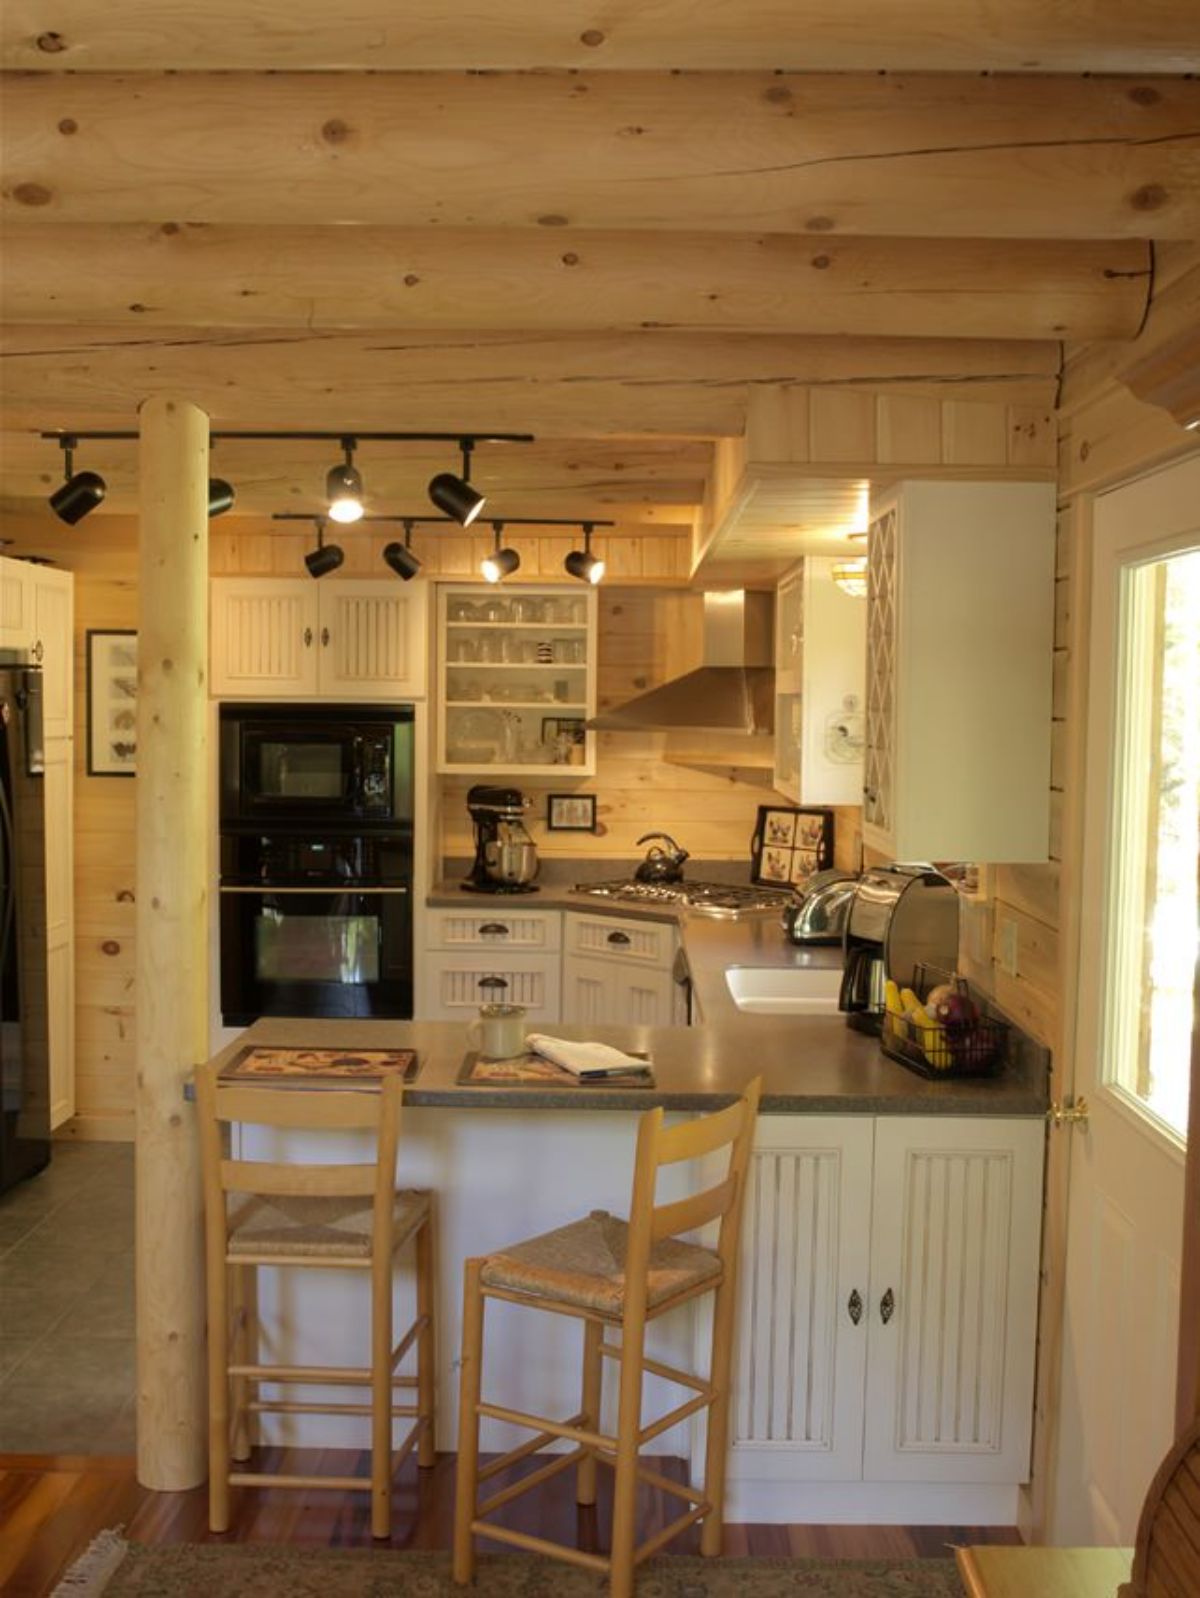 view into kitchen with light wood cabinets and stools in foreground